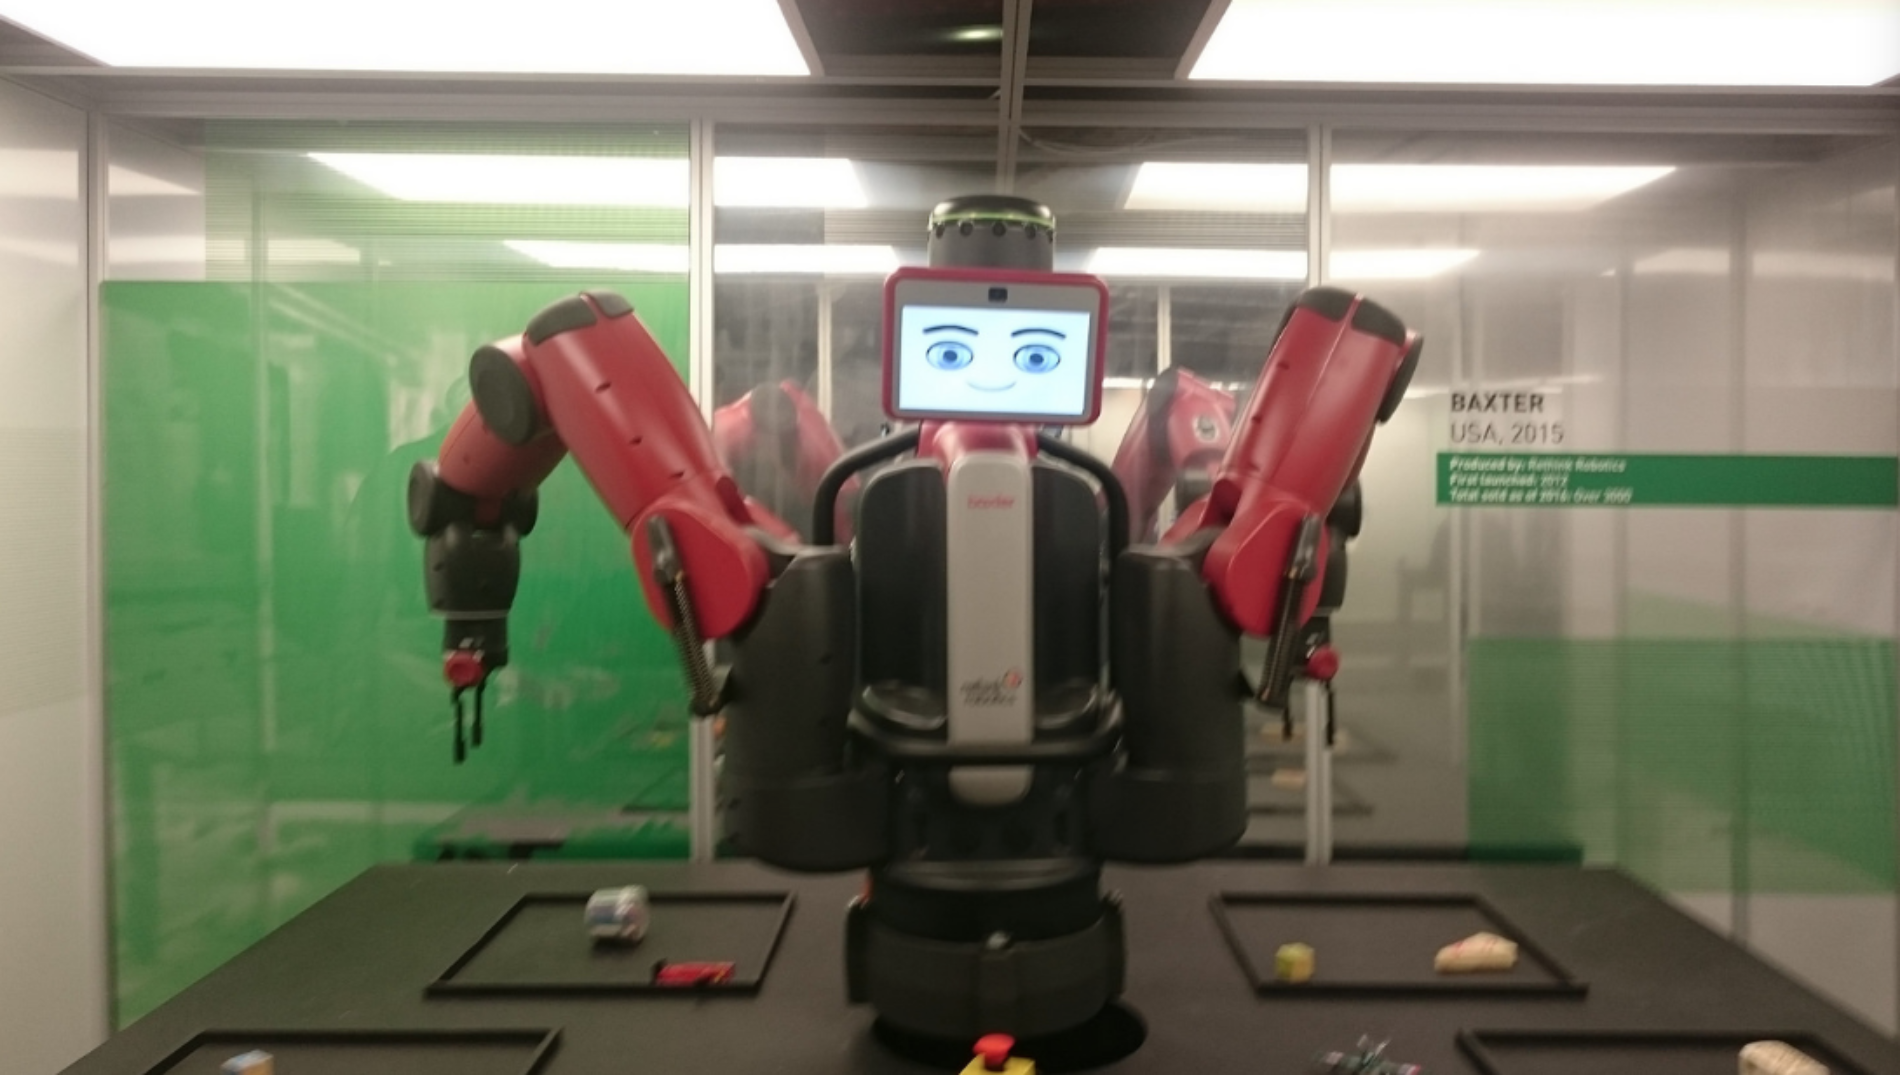 Robots That Can Read Minds